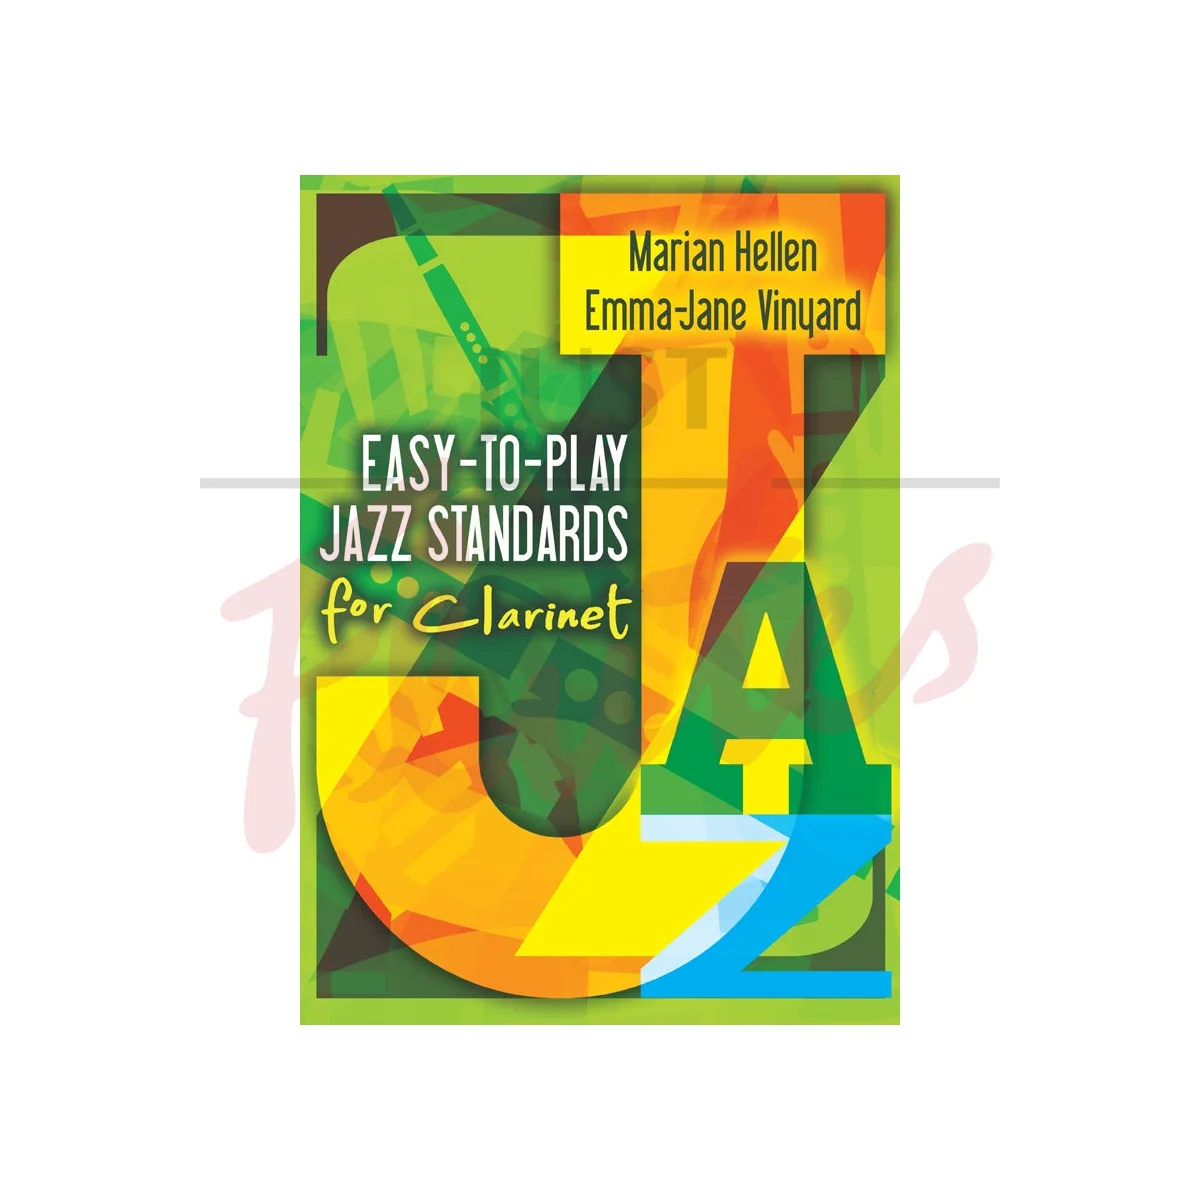 Easy-To-Play Jazz Standards for Clarinet